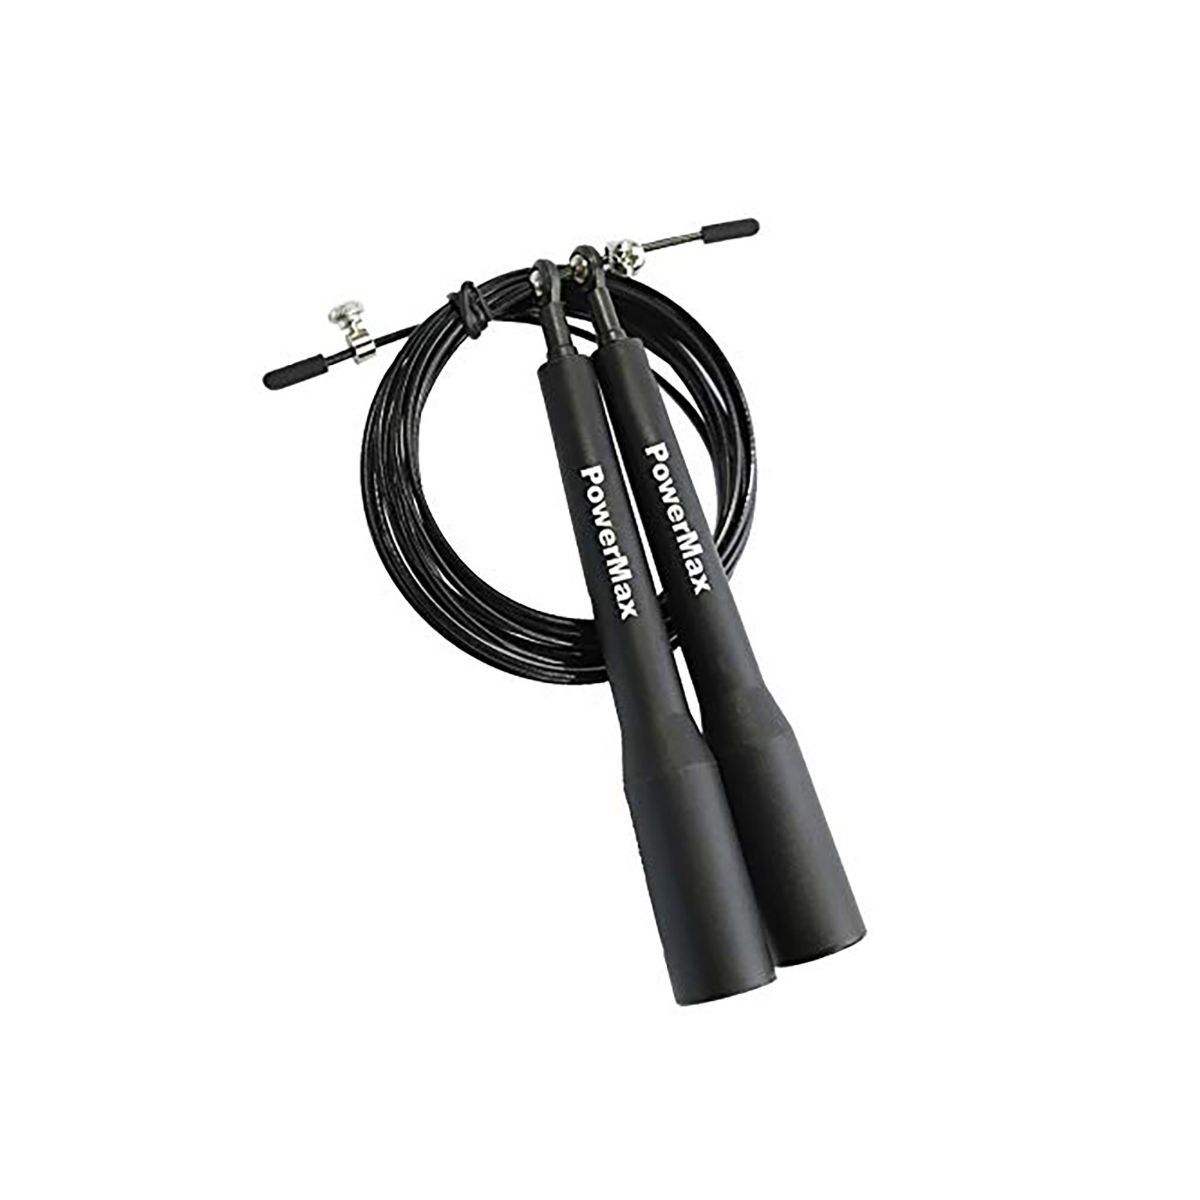 PowerMax Fitness JP-5 (Black)Exercise Speed Jump Rope With Adjustable Cable with Anti-Slip Handle